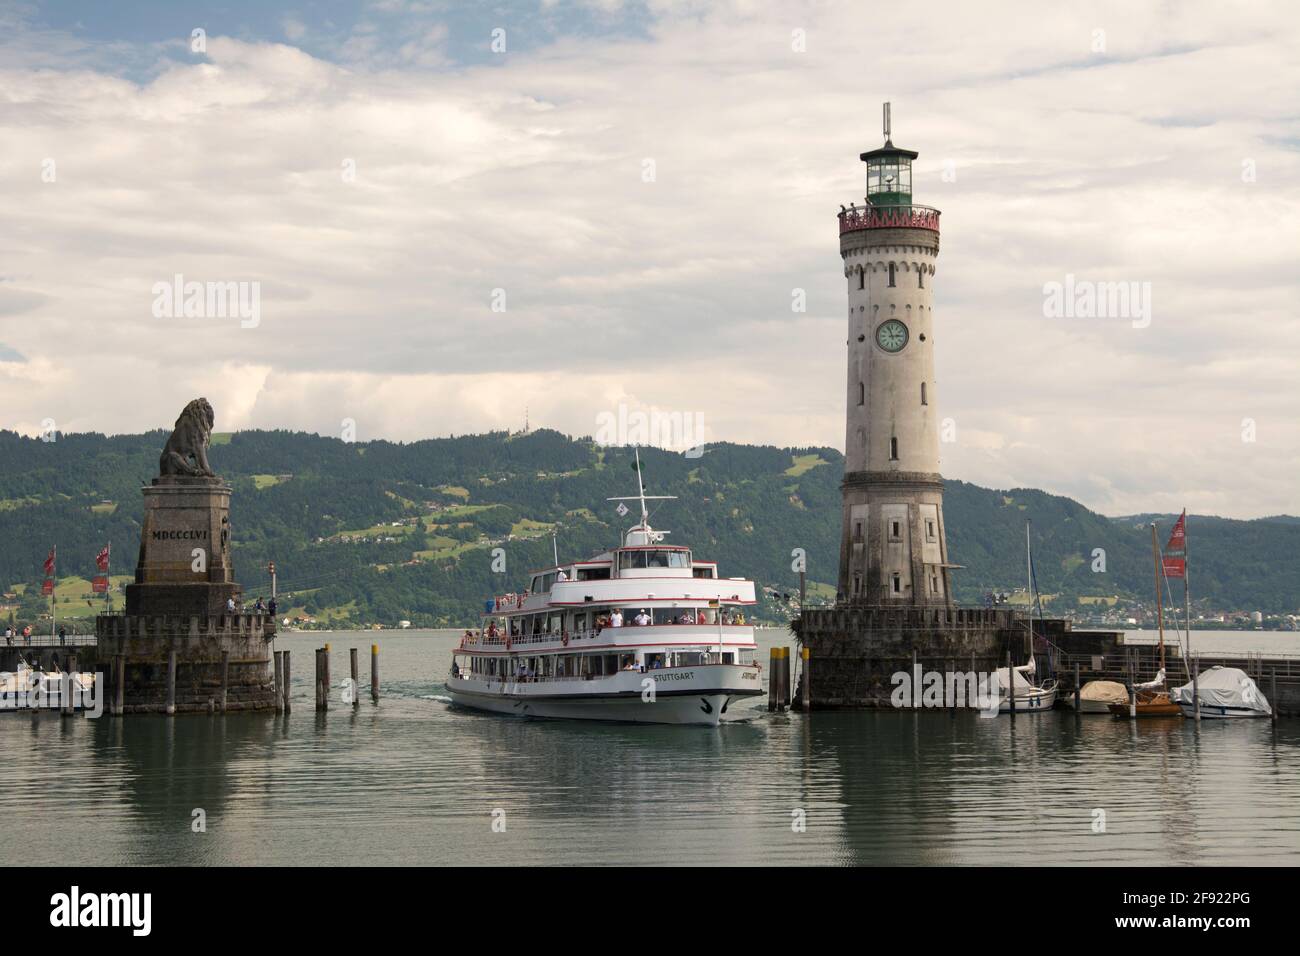 Lindau on the Bodensee (Lake Constance), southern Germany Stock Photo